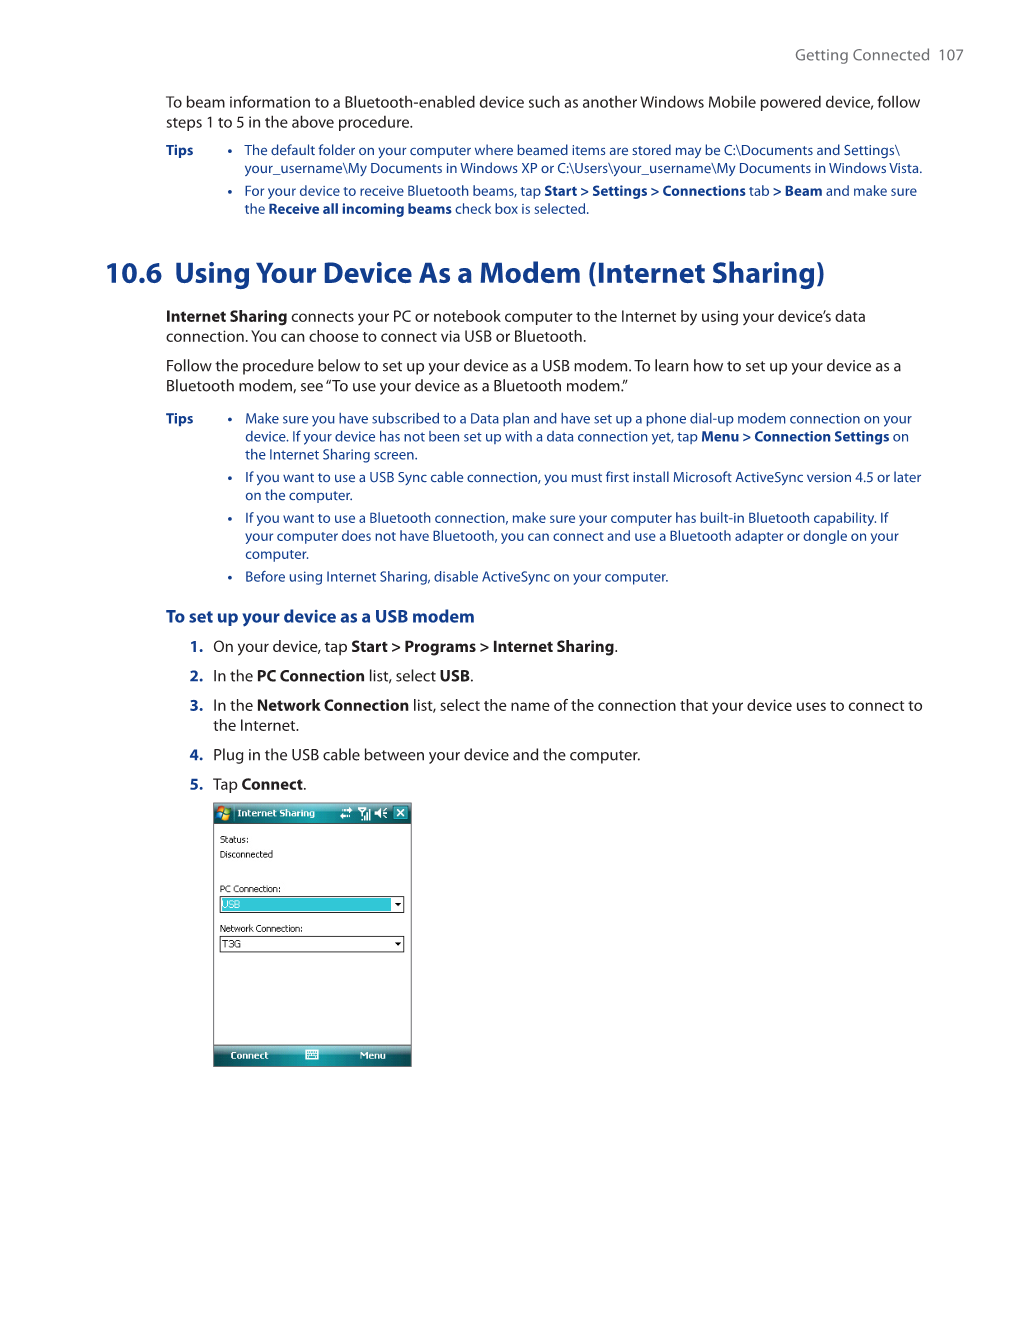 10.6 Using Your Device As a Modem (Internet Sharing)